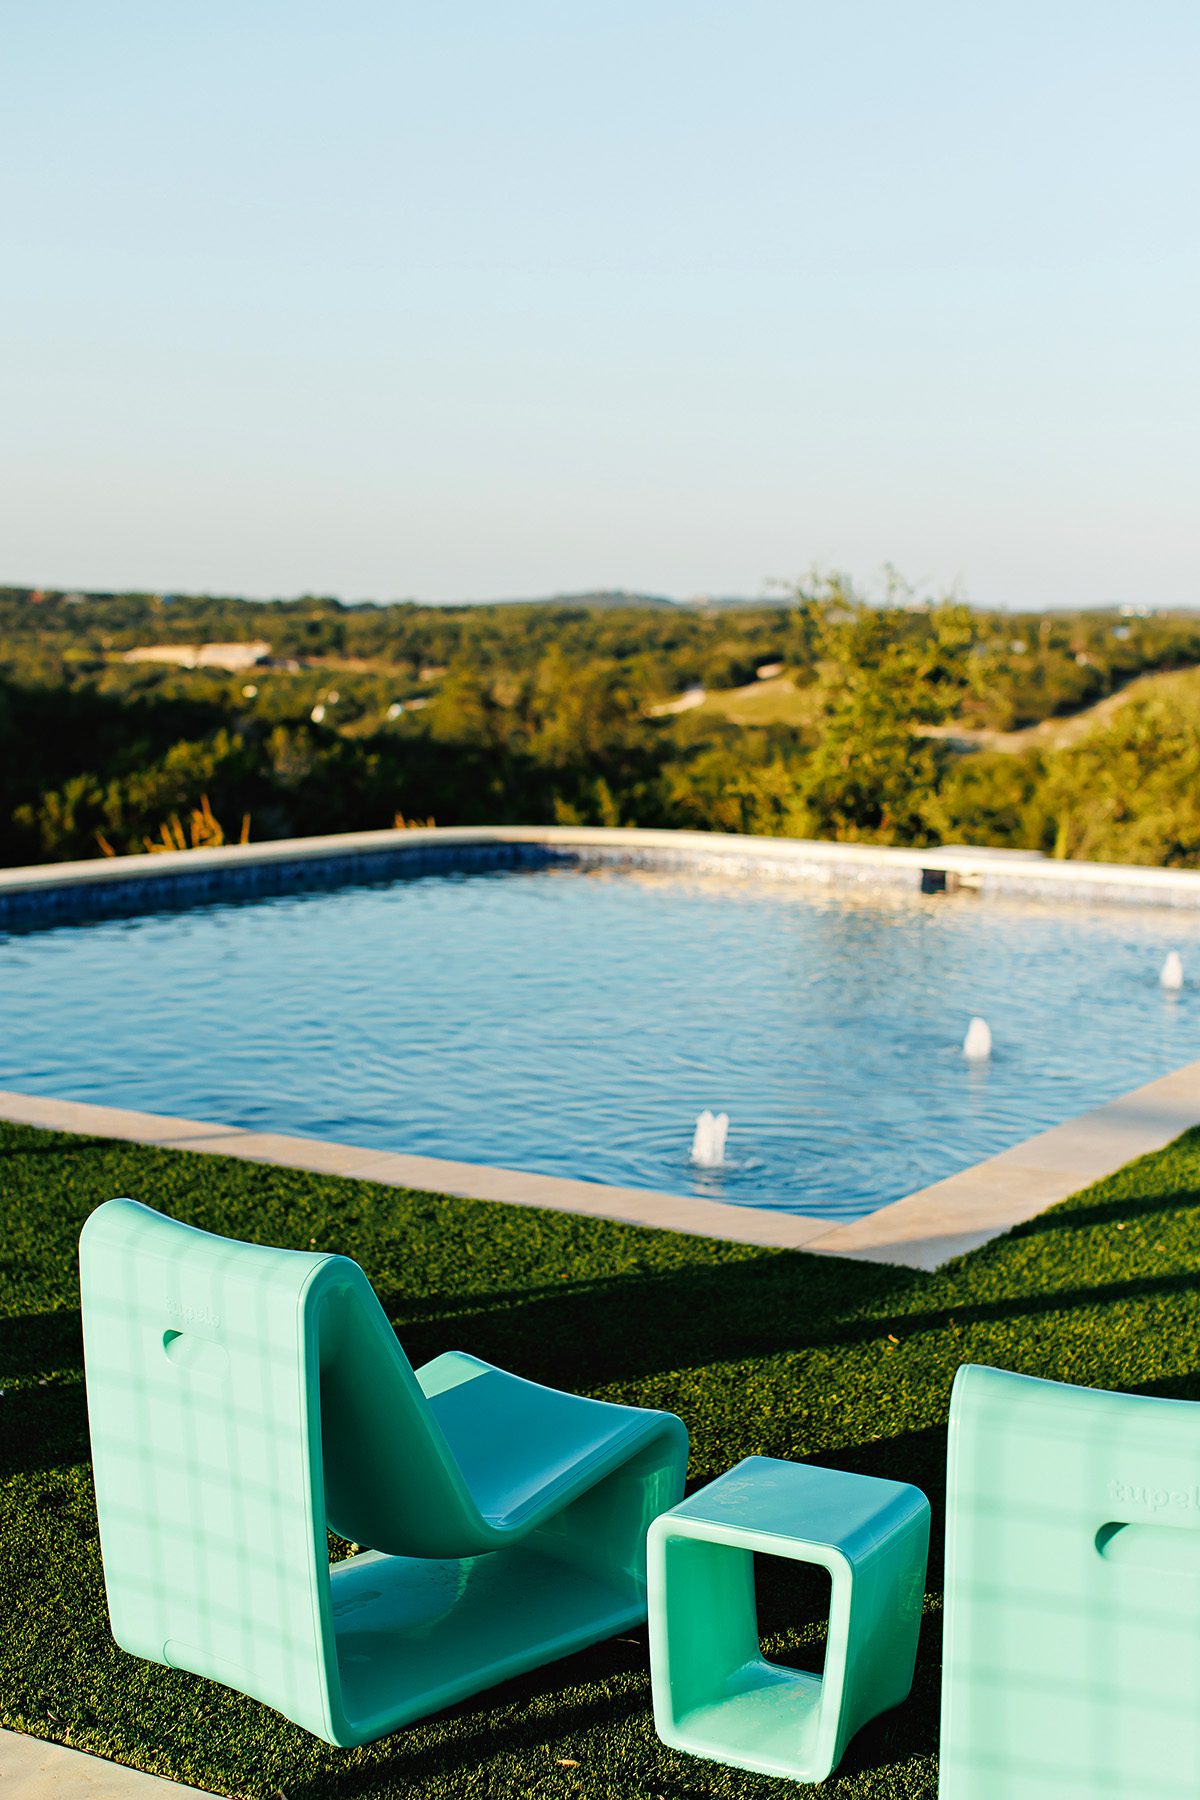 The Fitz RV Resort pool in Dripping Springs, Texas